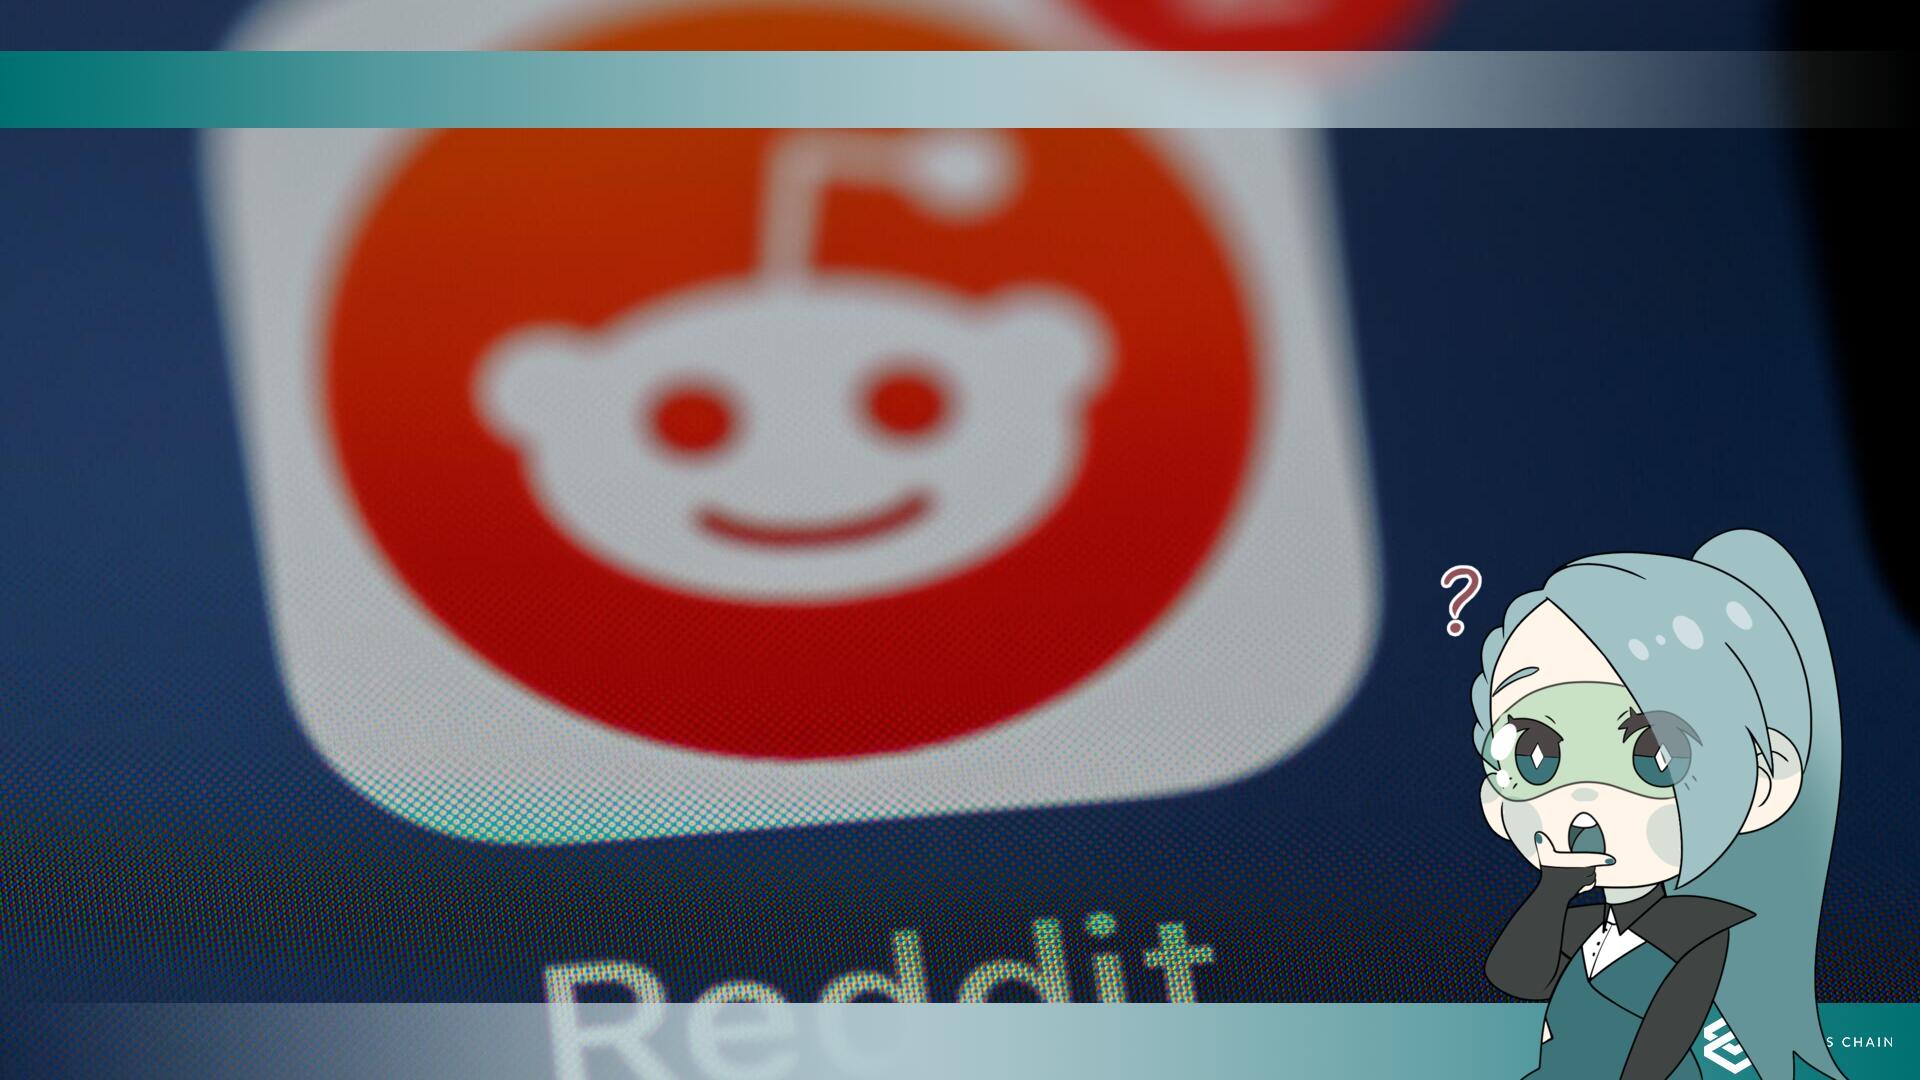  Reddit Reports Surge in Copyright Takedown Notices and User Bans